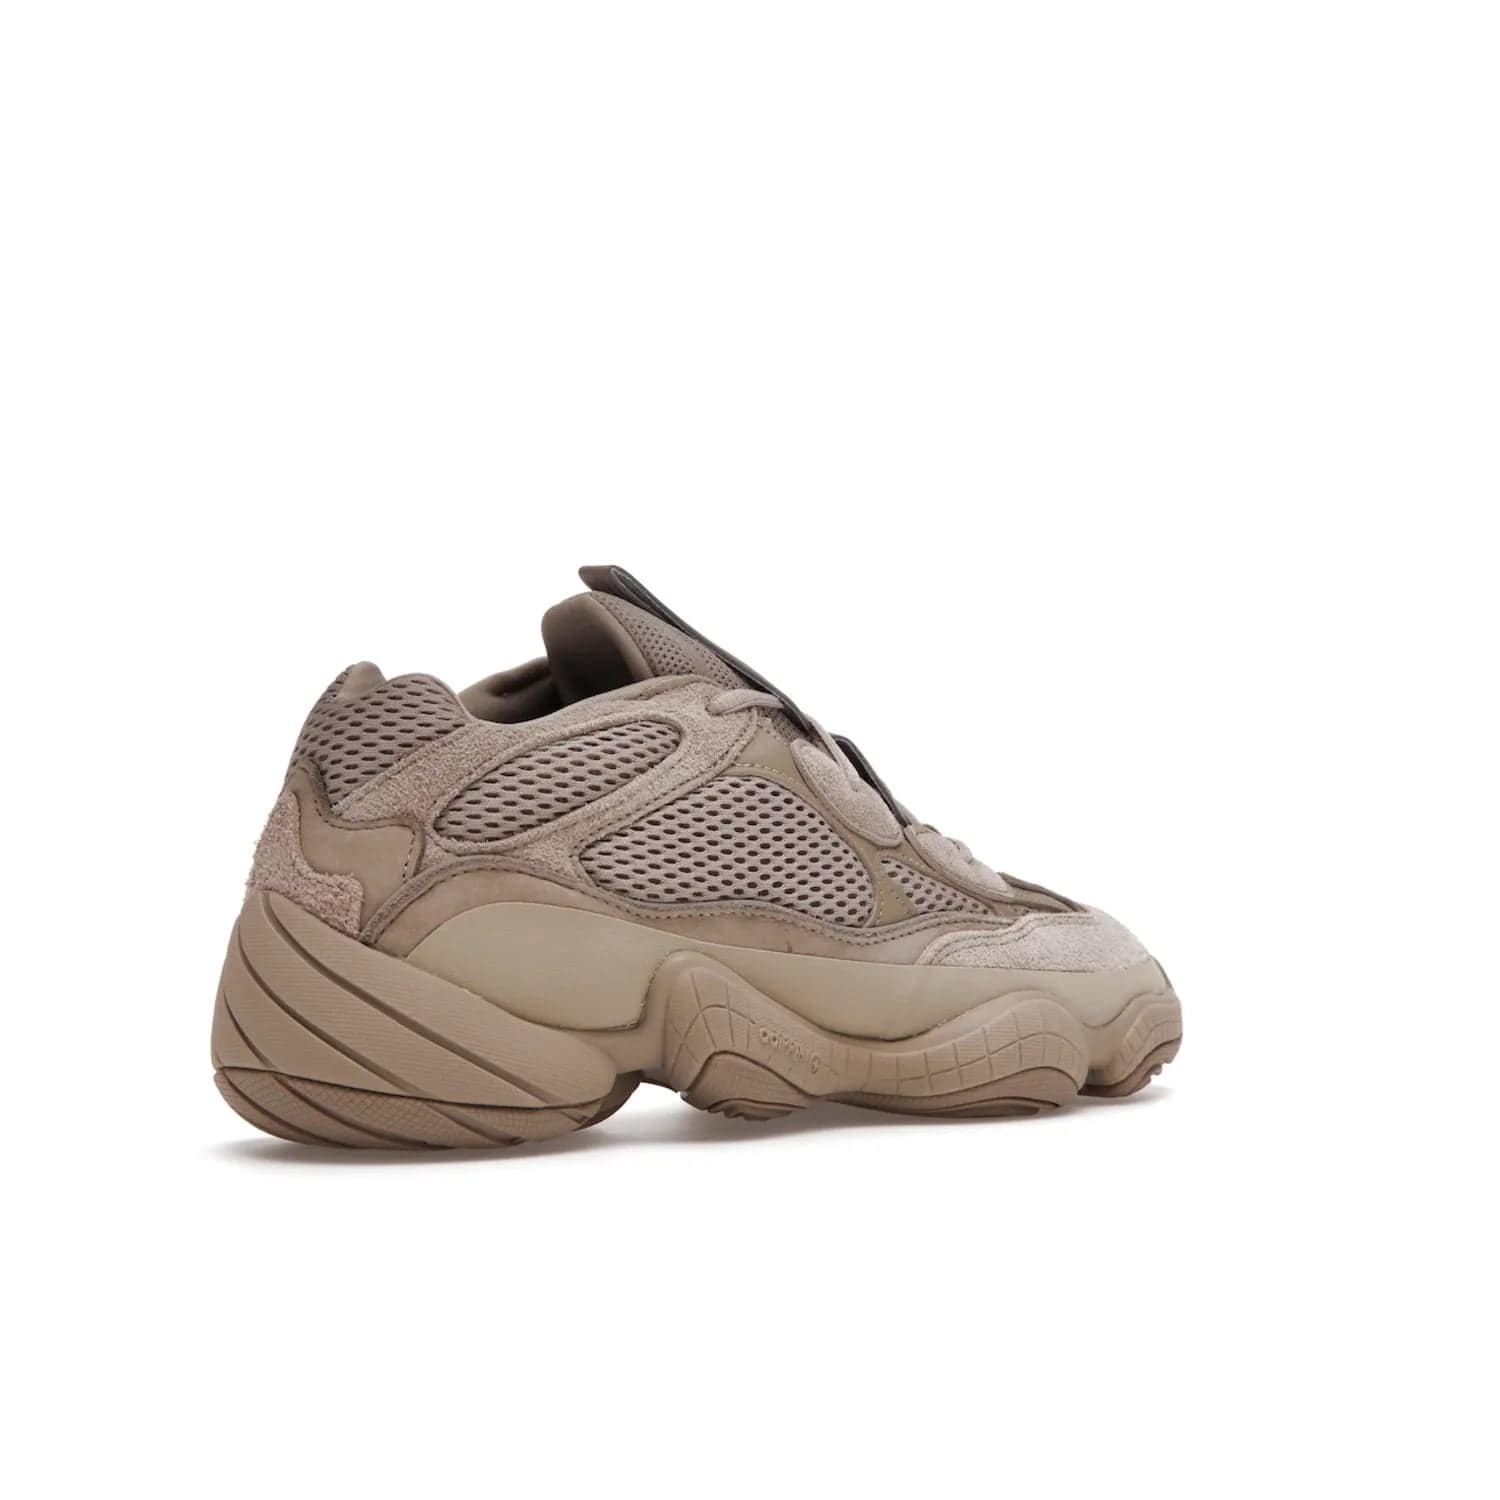 adidas Yeezy 500 Taupe Light - Image 33 - Only at www.BallersClubKickz.com - The adidas Yeezy 500 Taupe Light combines mesh, leather, and suede, with a durable adiPRENE sole for an eye-catching accessory. Reflective piping adds the perfect finishing touches to this unique silhouette. Ideal for any wardrobe, releasing in June 2021.